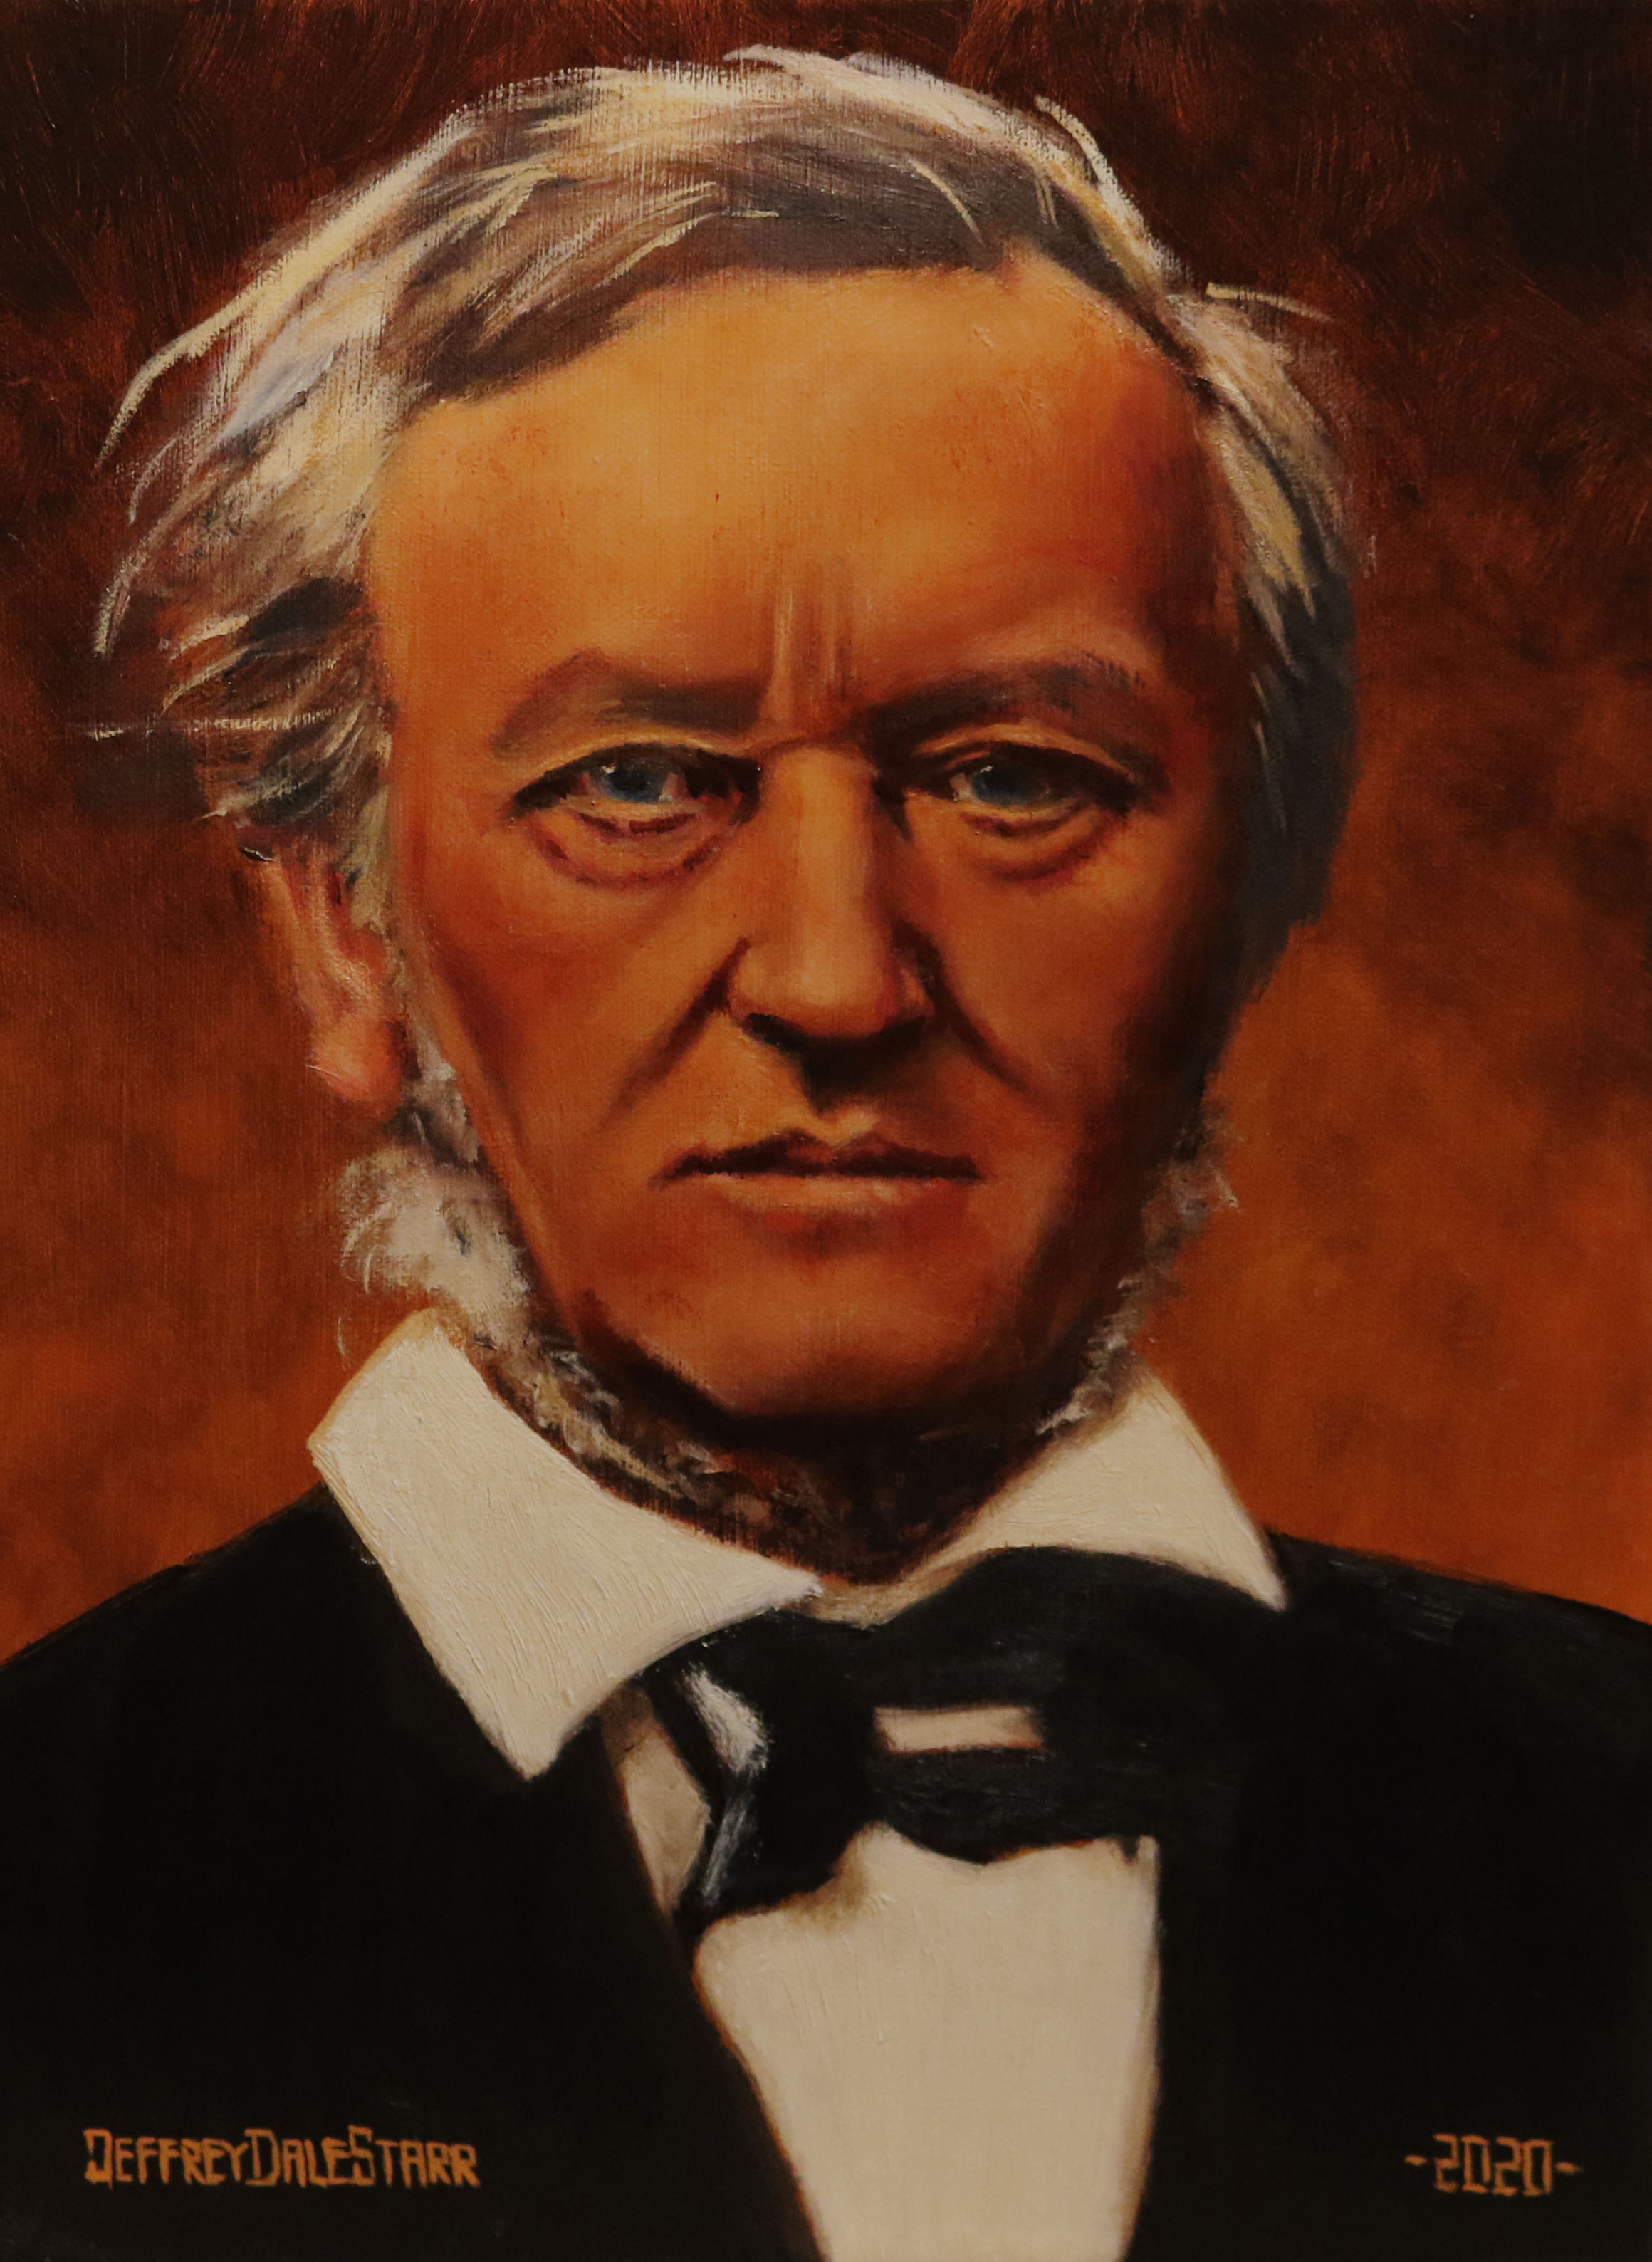 Oil painting "Richard Wagner" by Jeffrey Dale Starr